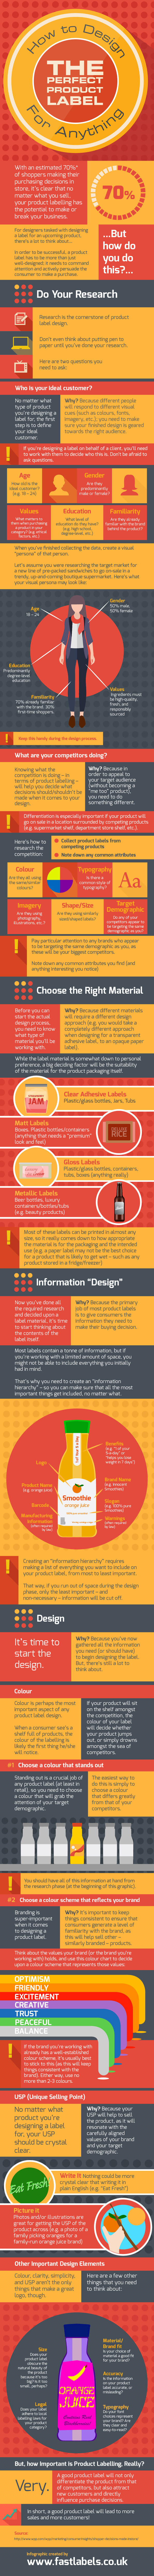 How to design a product label